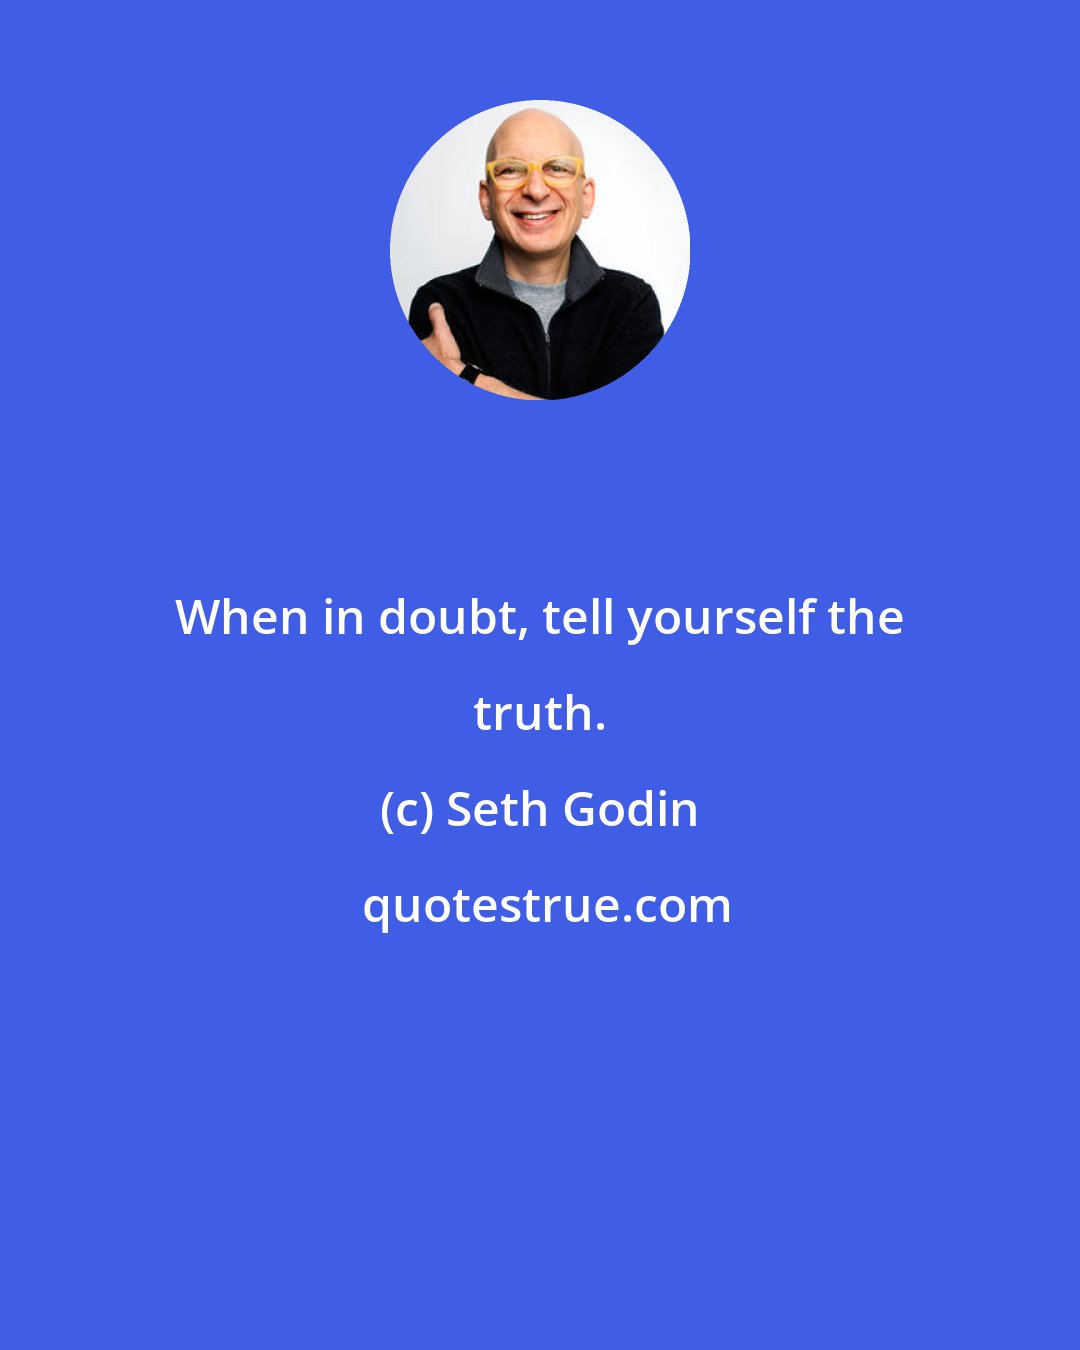 Seth Godin: When in doubt, tell yourself the truth.